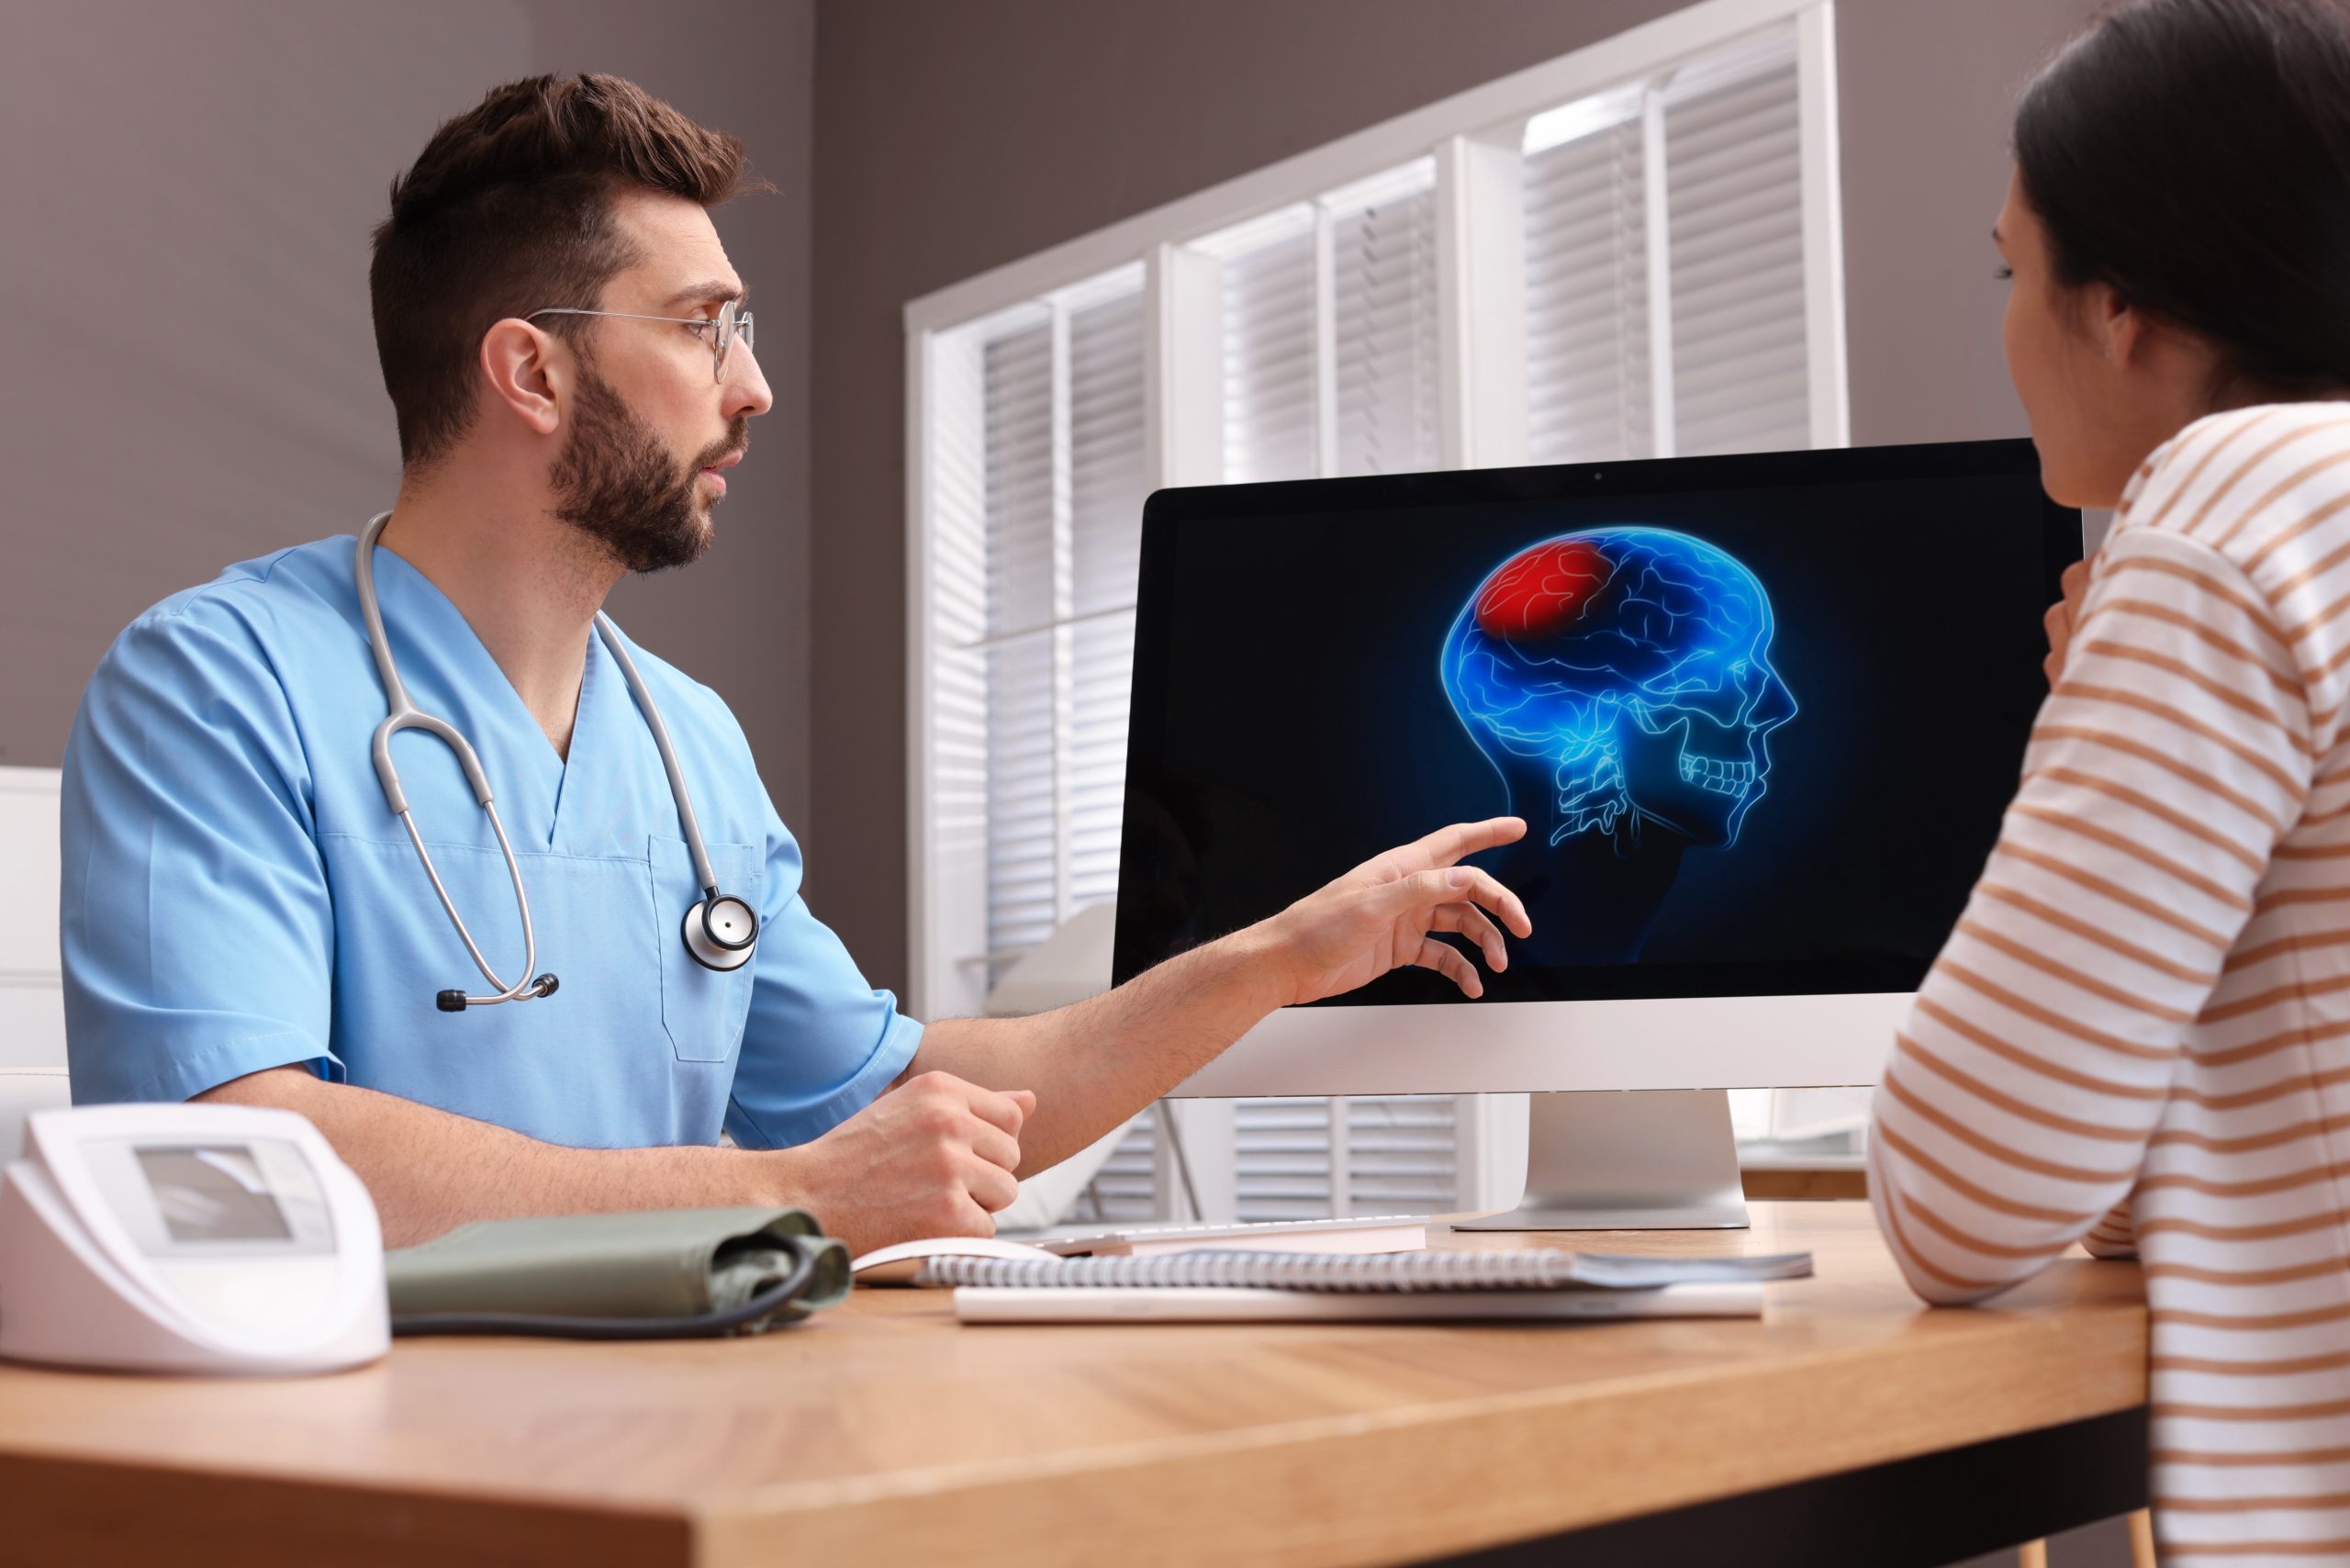 A male medical professional in blue scrubs, wearing a stethoscope, points at a computer screen displaying an image of a brain with a highlighted area in red. He is discussing PTSD treatment with a female patient seated across the desk in a striped shirt at Khiron Clinics.